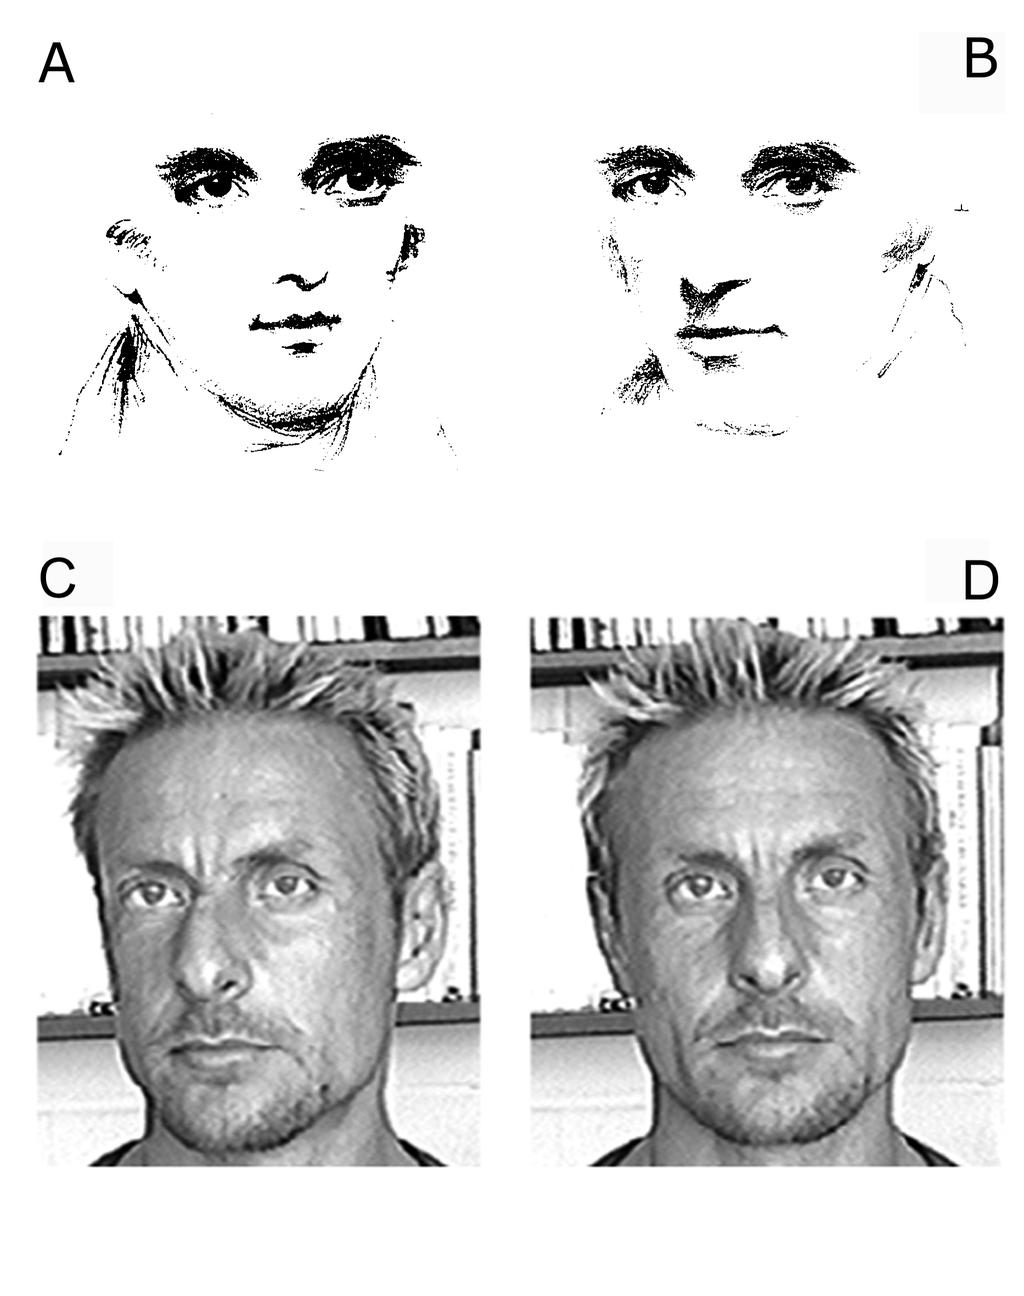 8 under these conditions, you might perceive their eyes to be gazing a little further to the left than they actually are (Anstis et al., 1969; Gibson & Pick, 1963). Figure 1.